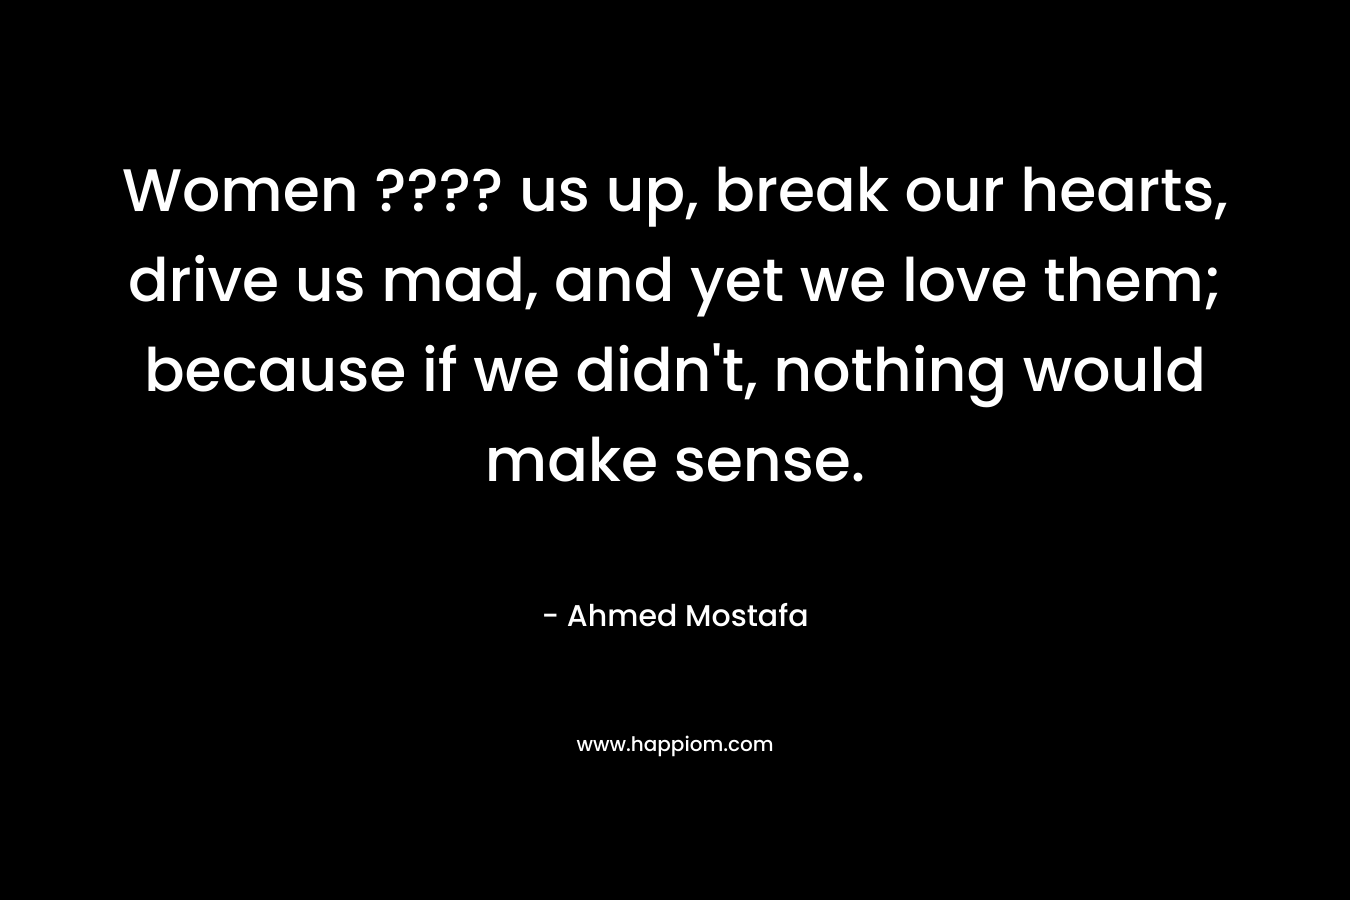 Women ???? us up, break our hearts, drive us mad, and yet we love them; because if we didn't, nothing would make sense.